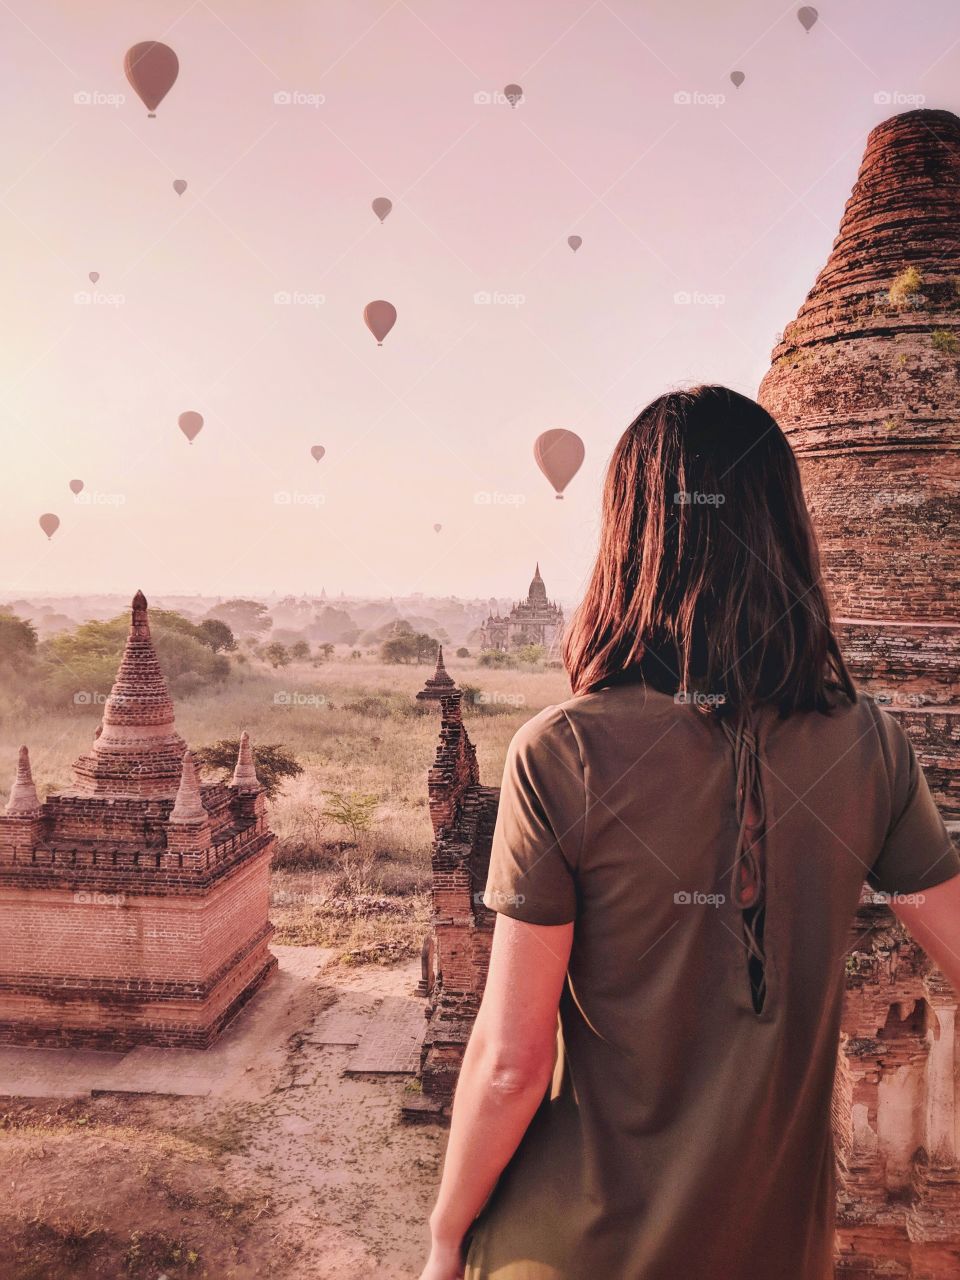 A beautiful morning in Bagan watching the air balloons lifting over the temples